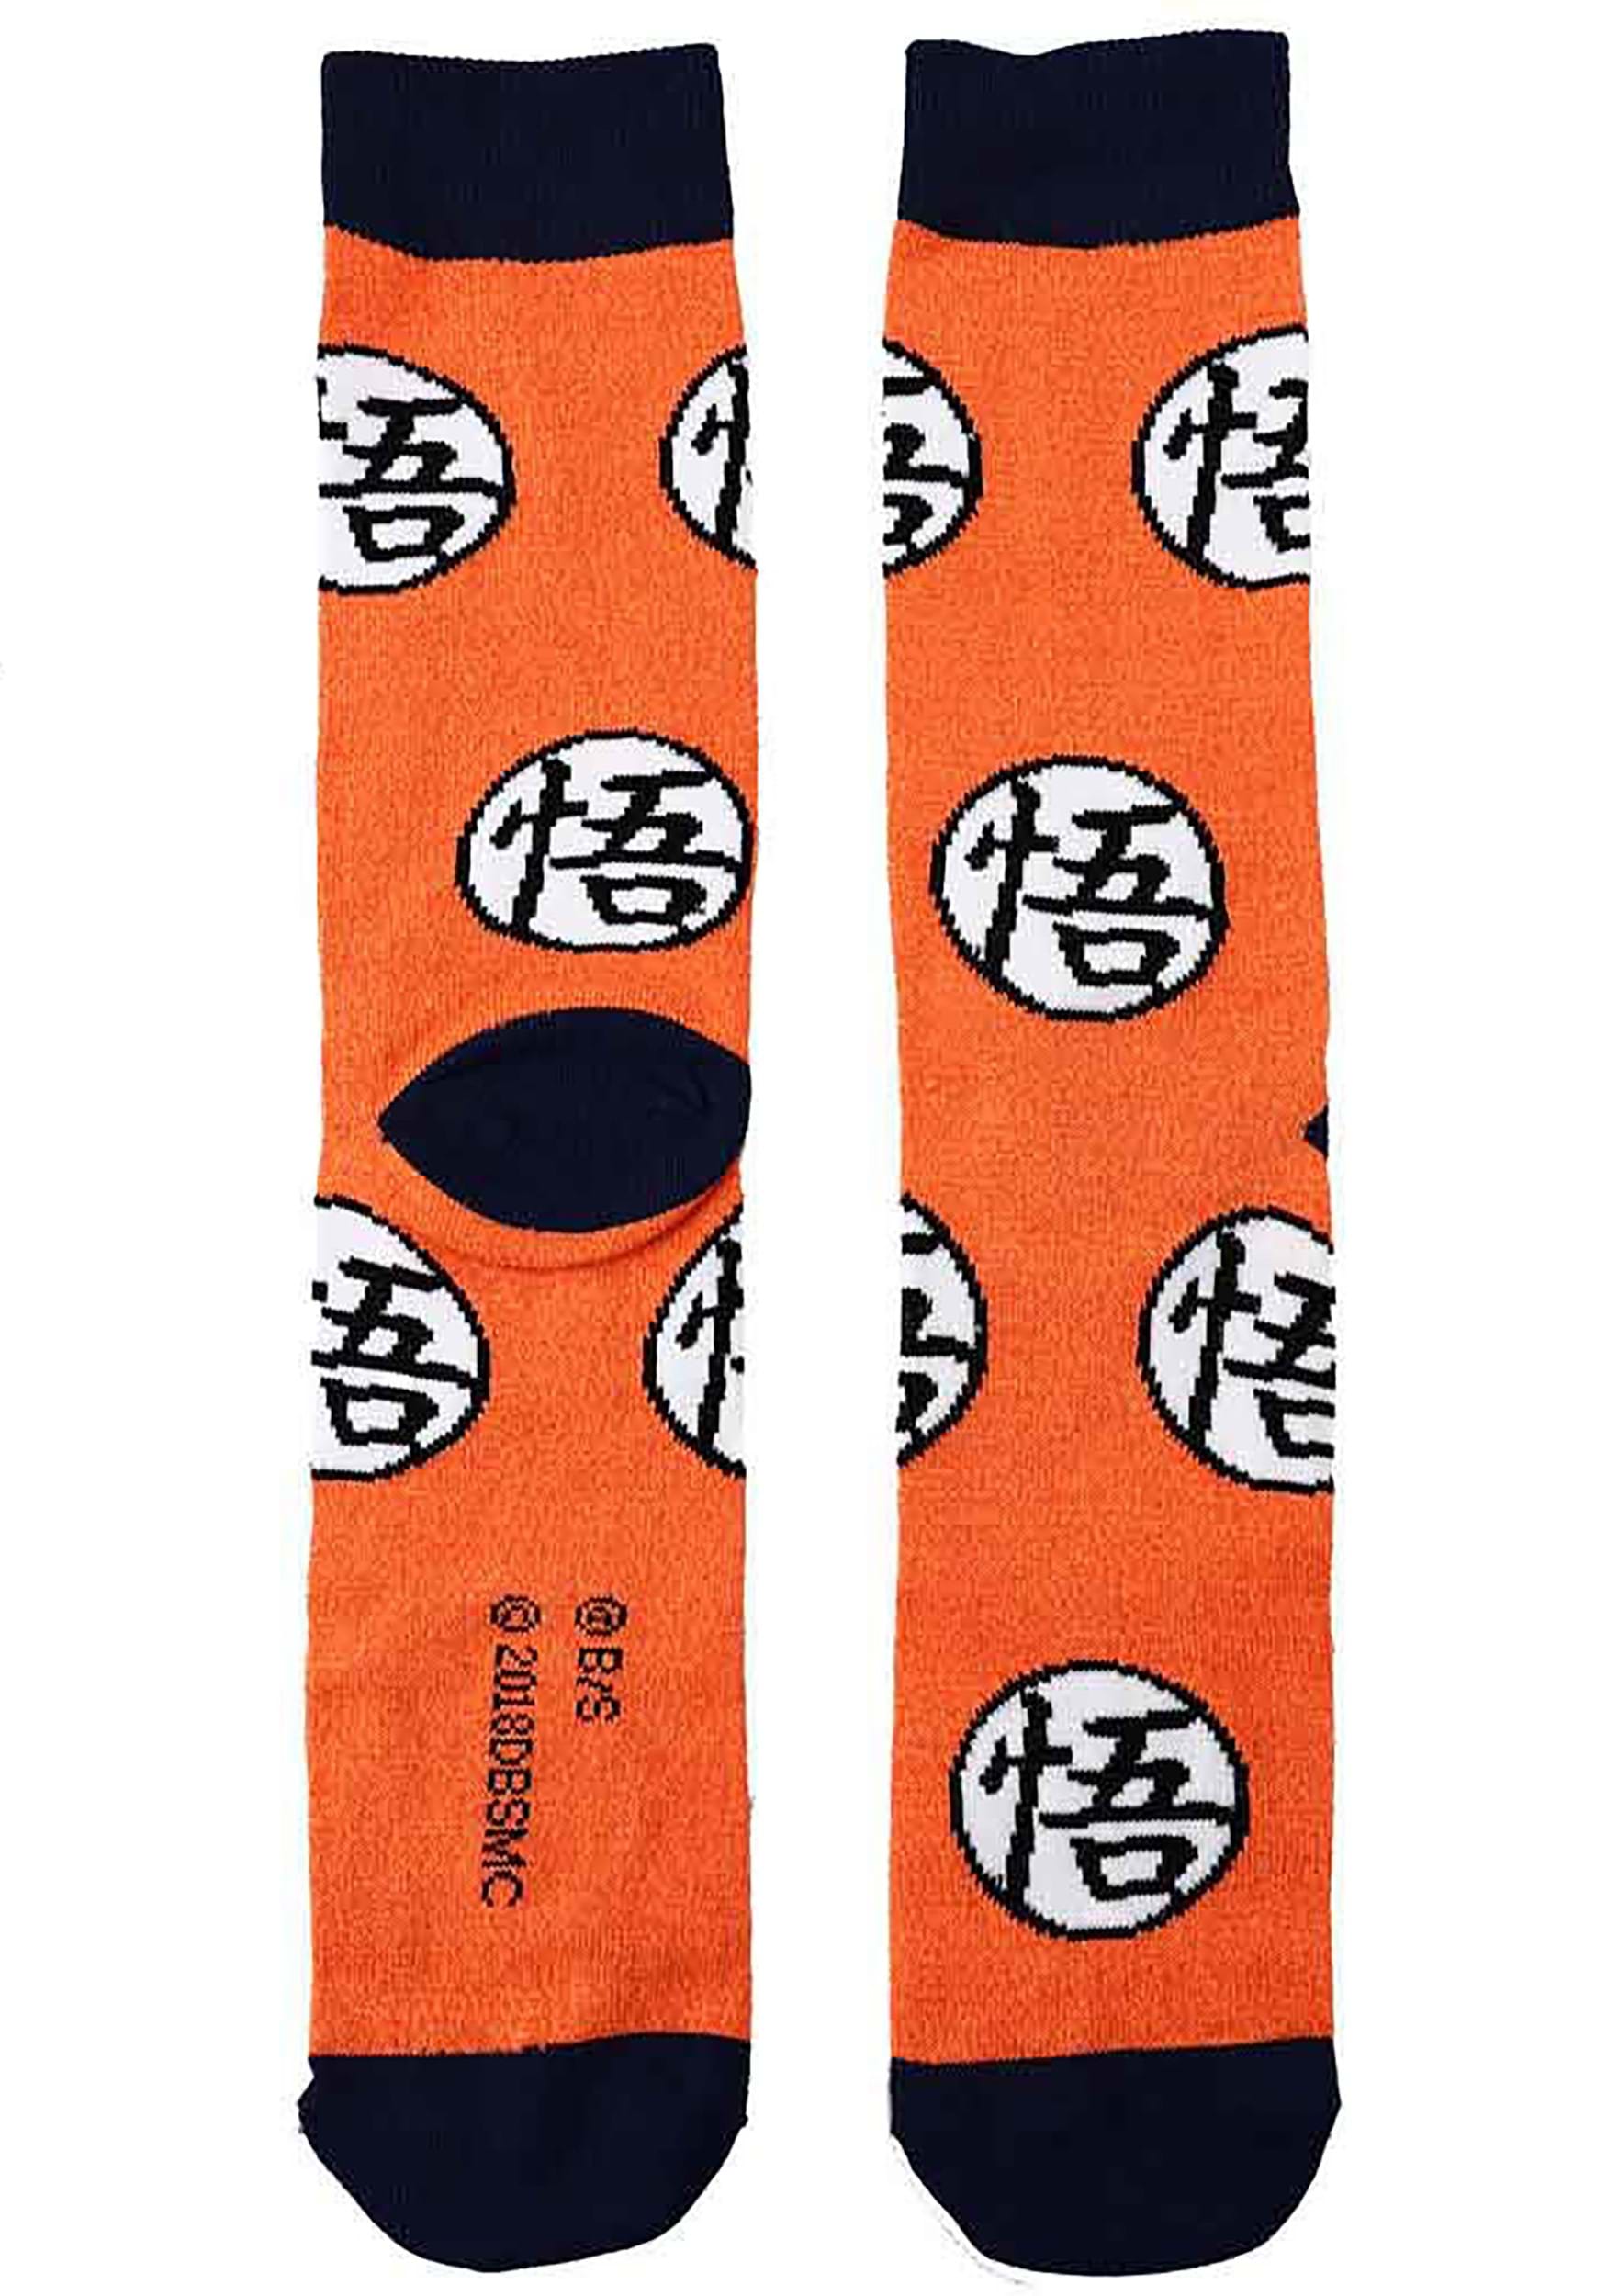 Dragon Ball Z Crew Socks Pack of 2 SetsOne Size Fits Most 